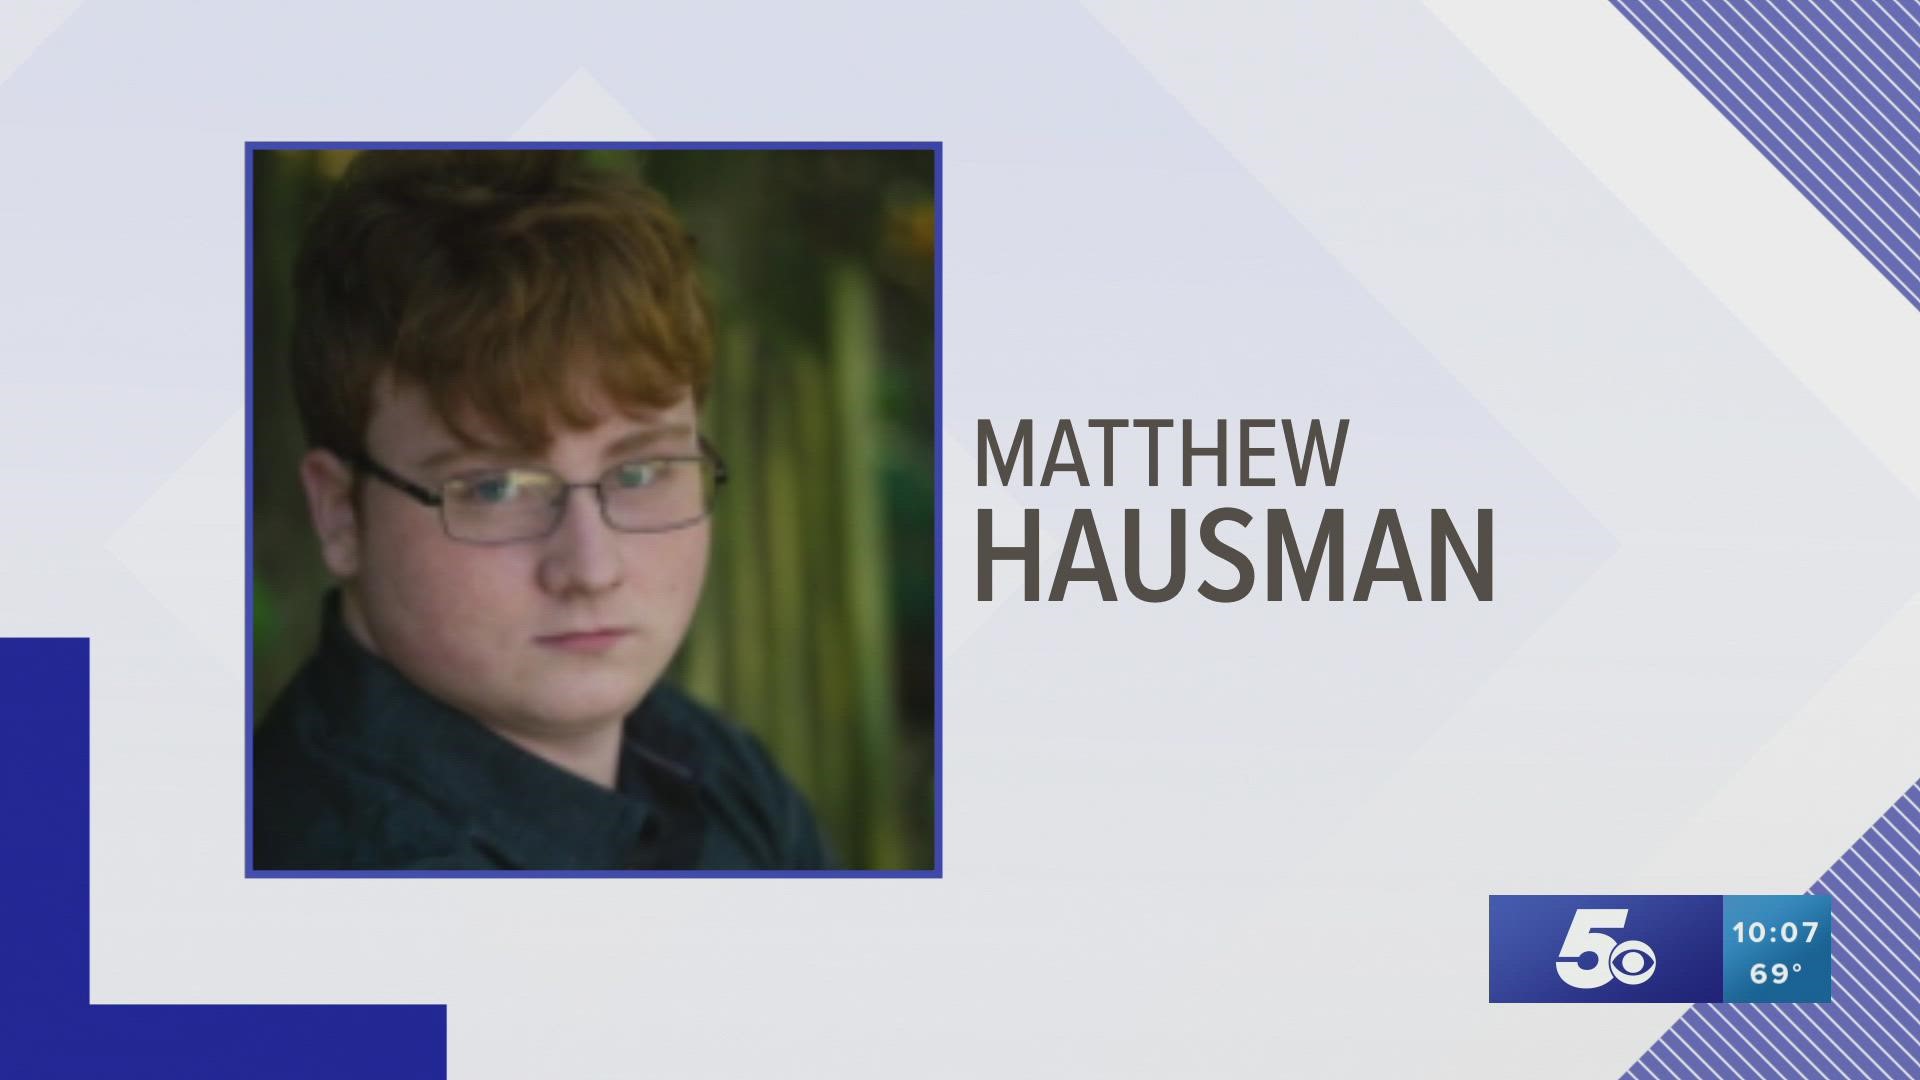 Arkansas State Police name Matthew Hausman, a senior at Berryville High School, as the victim of fatal a car crash that happened in Carroll County on Sunday, May 15.